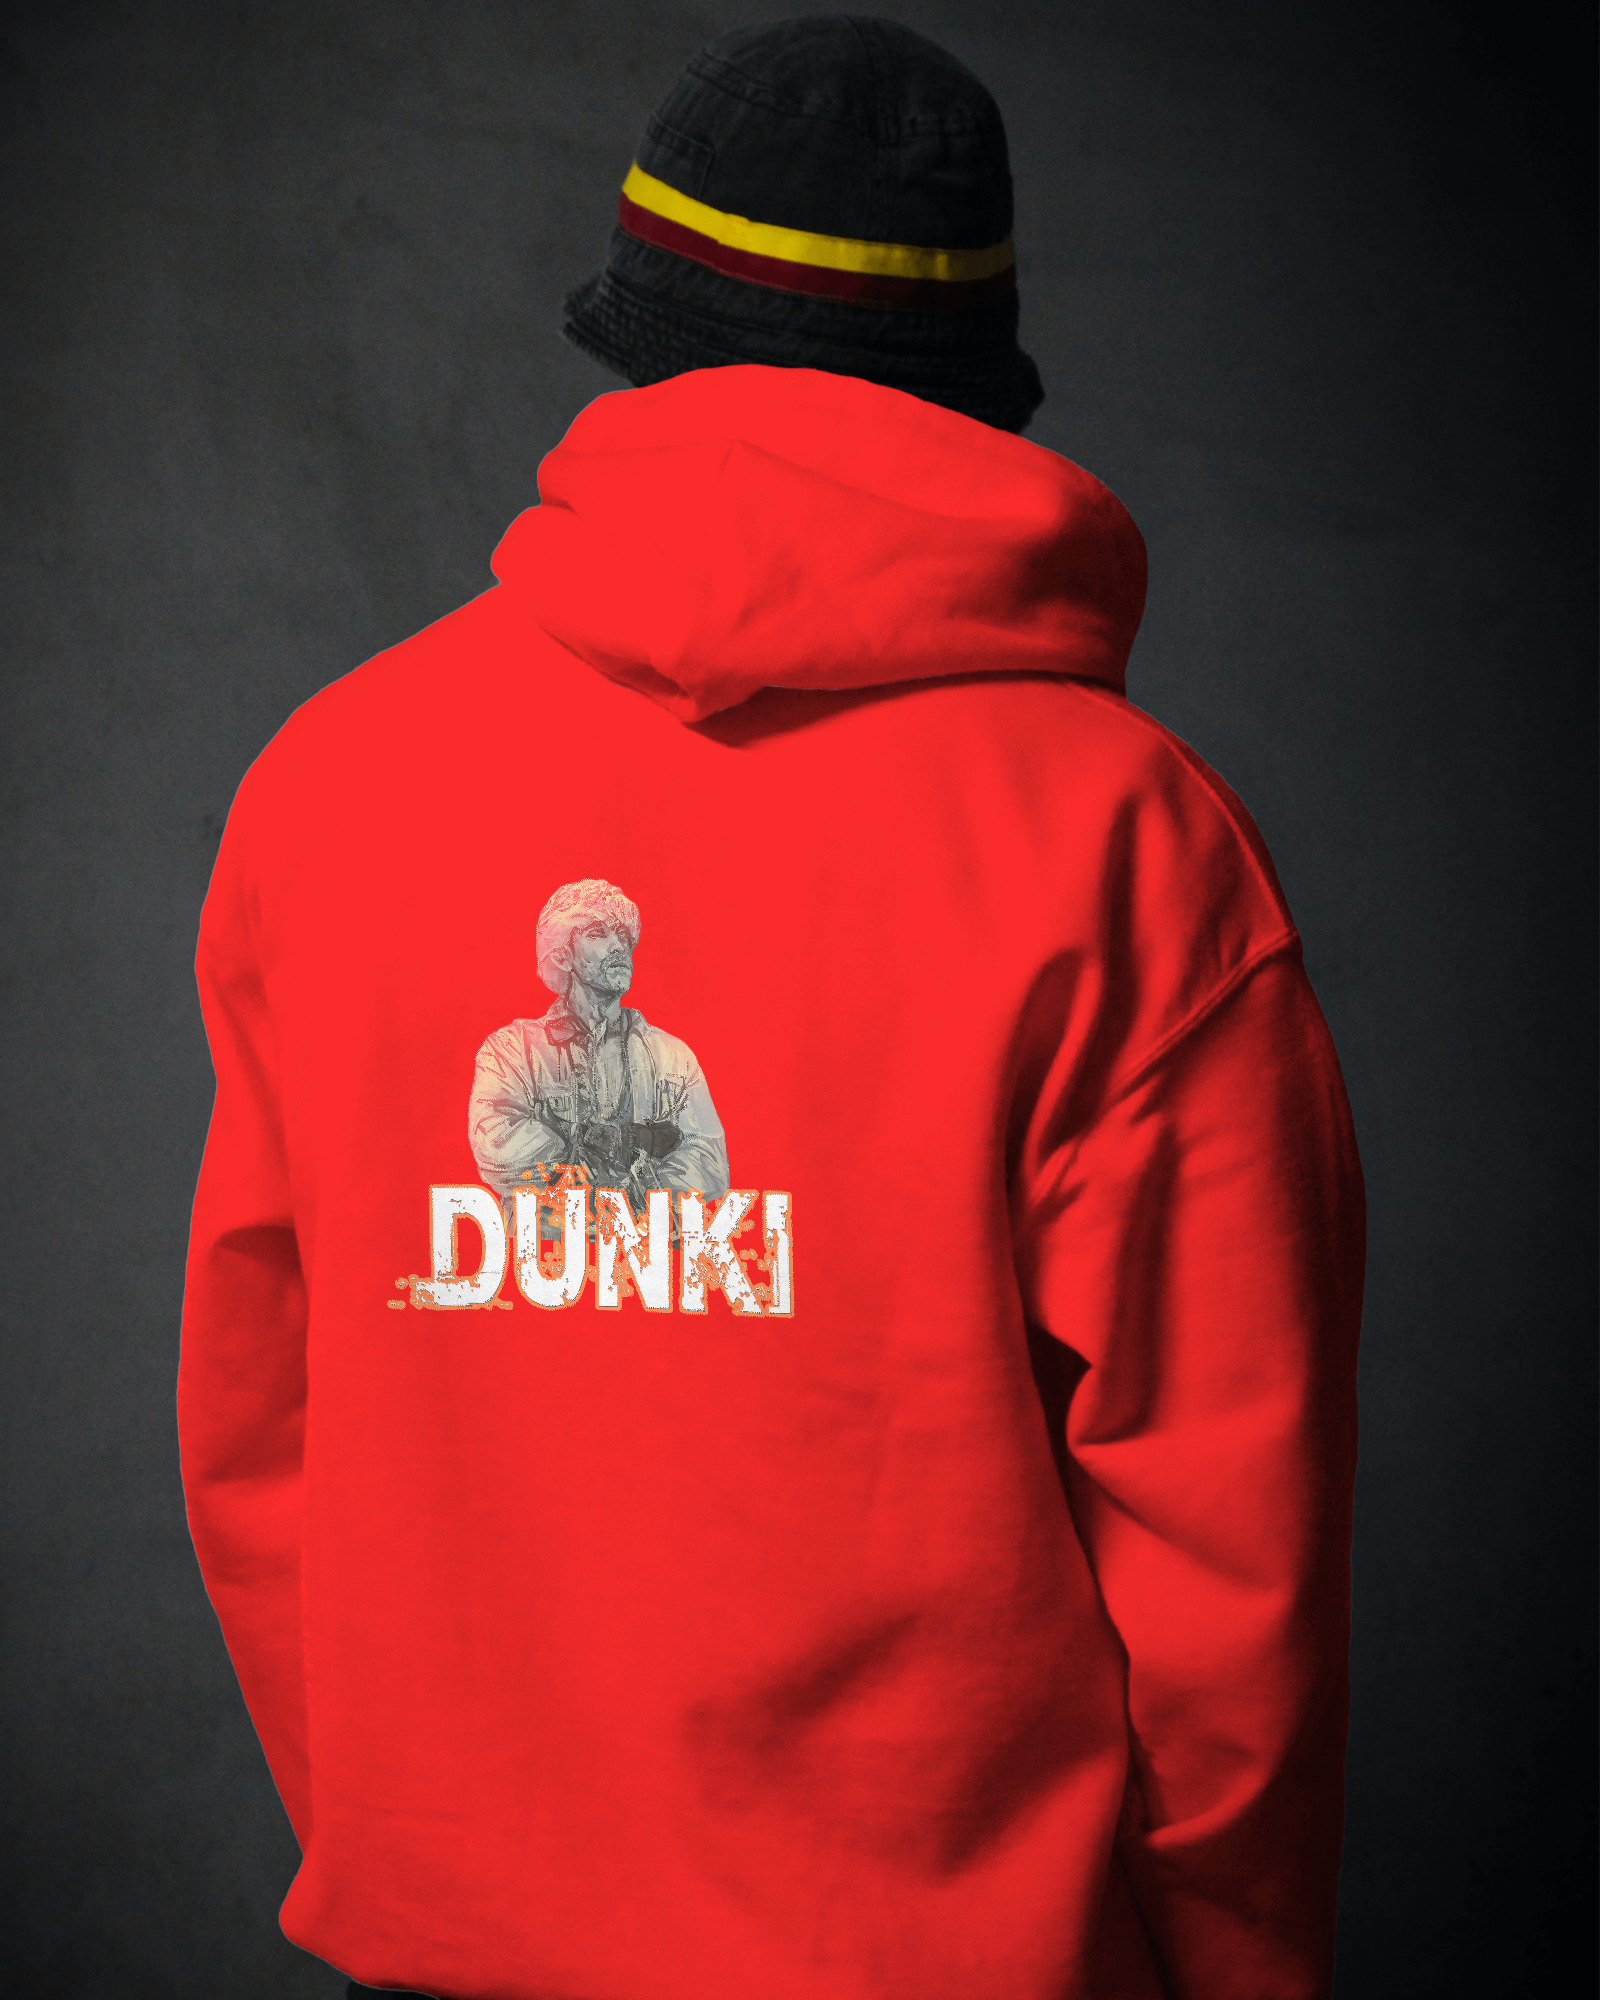 DUNKI DESIGN BACK PRINTED HOODIES FOR WINTER RED COLOUR